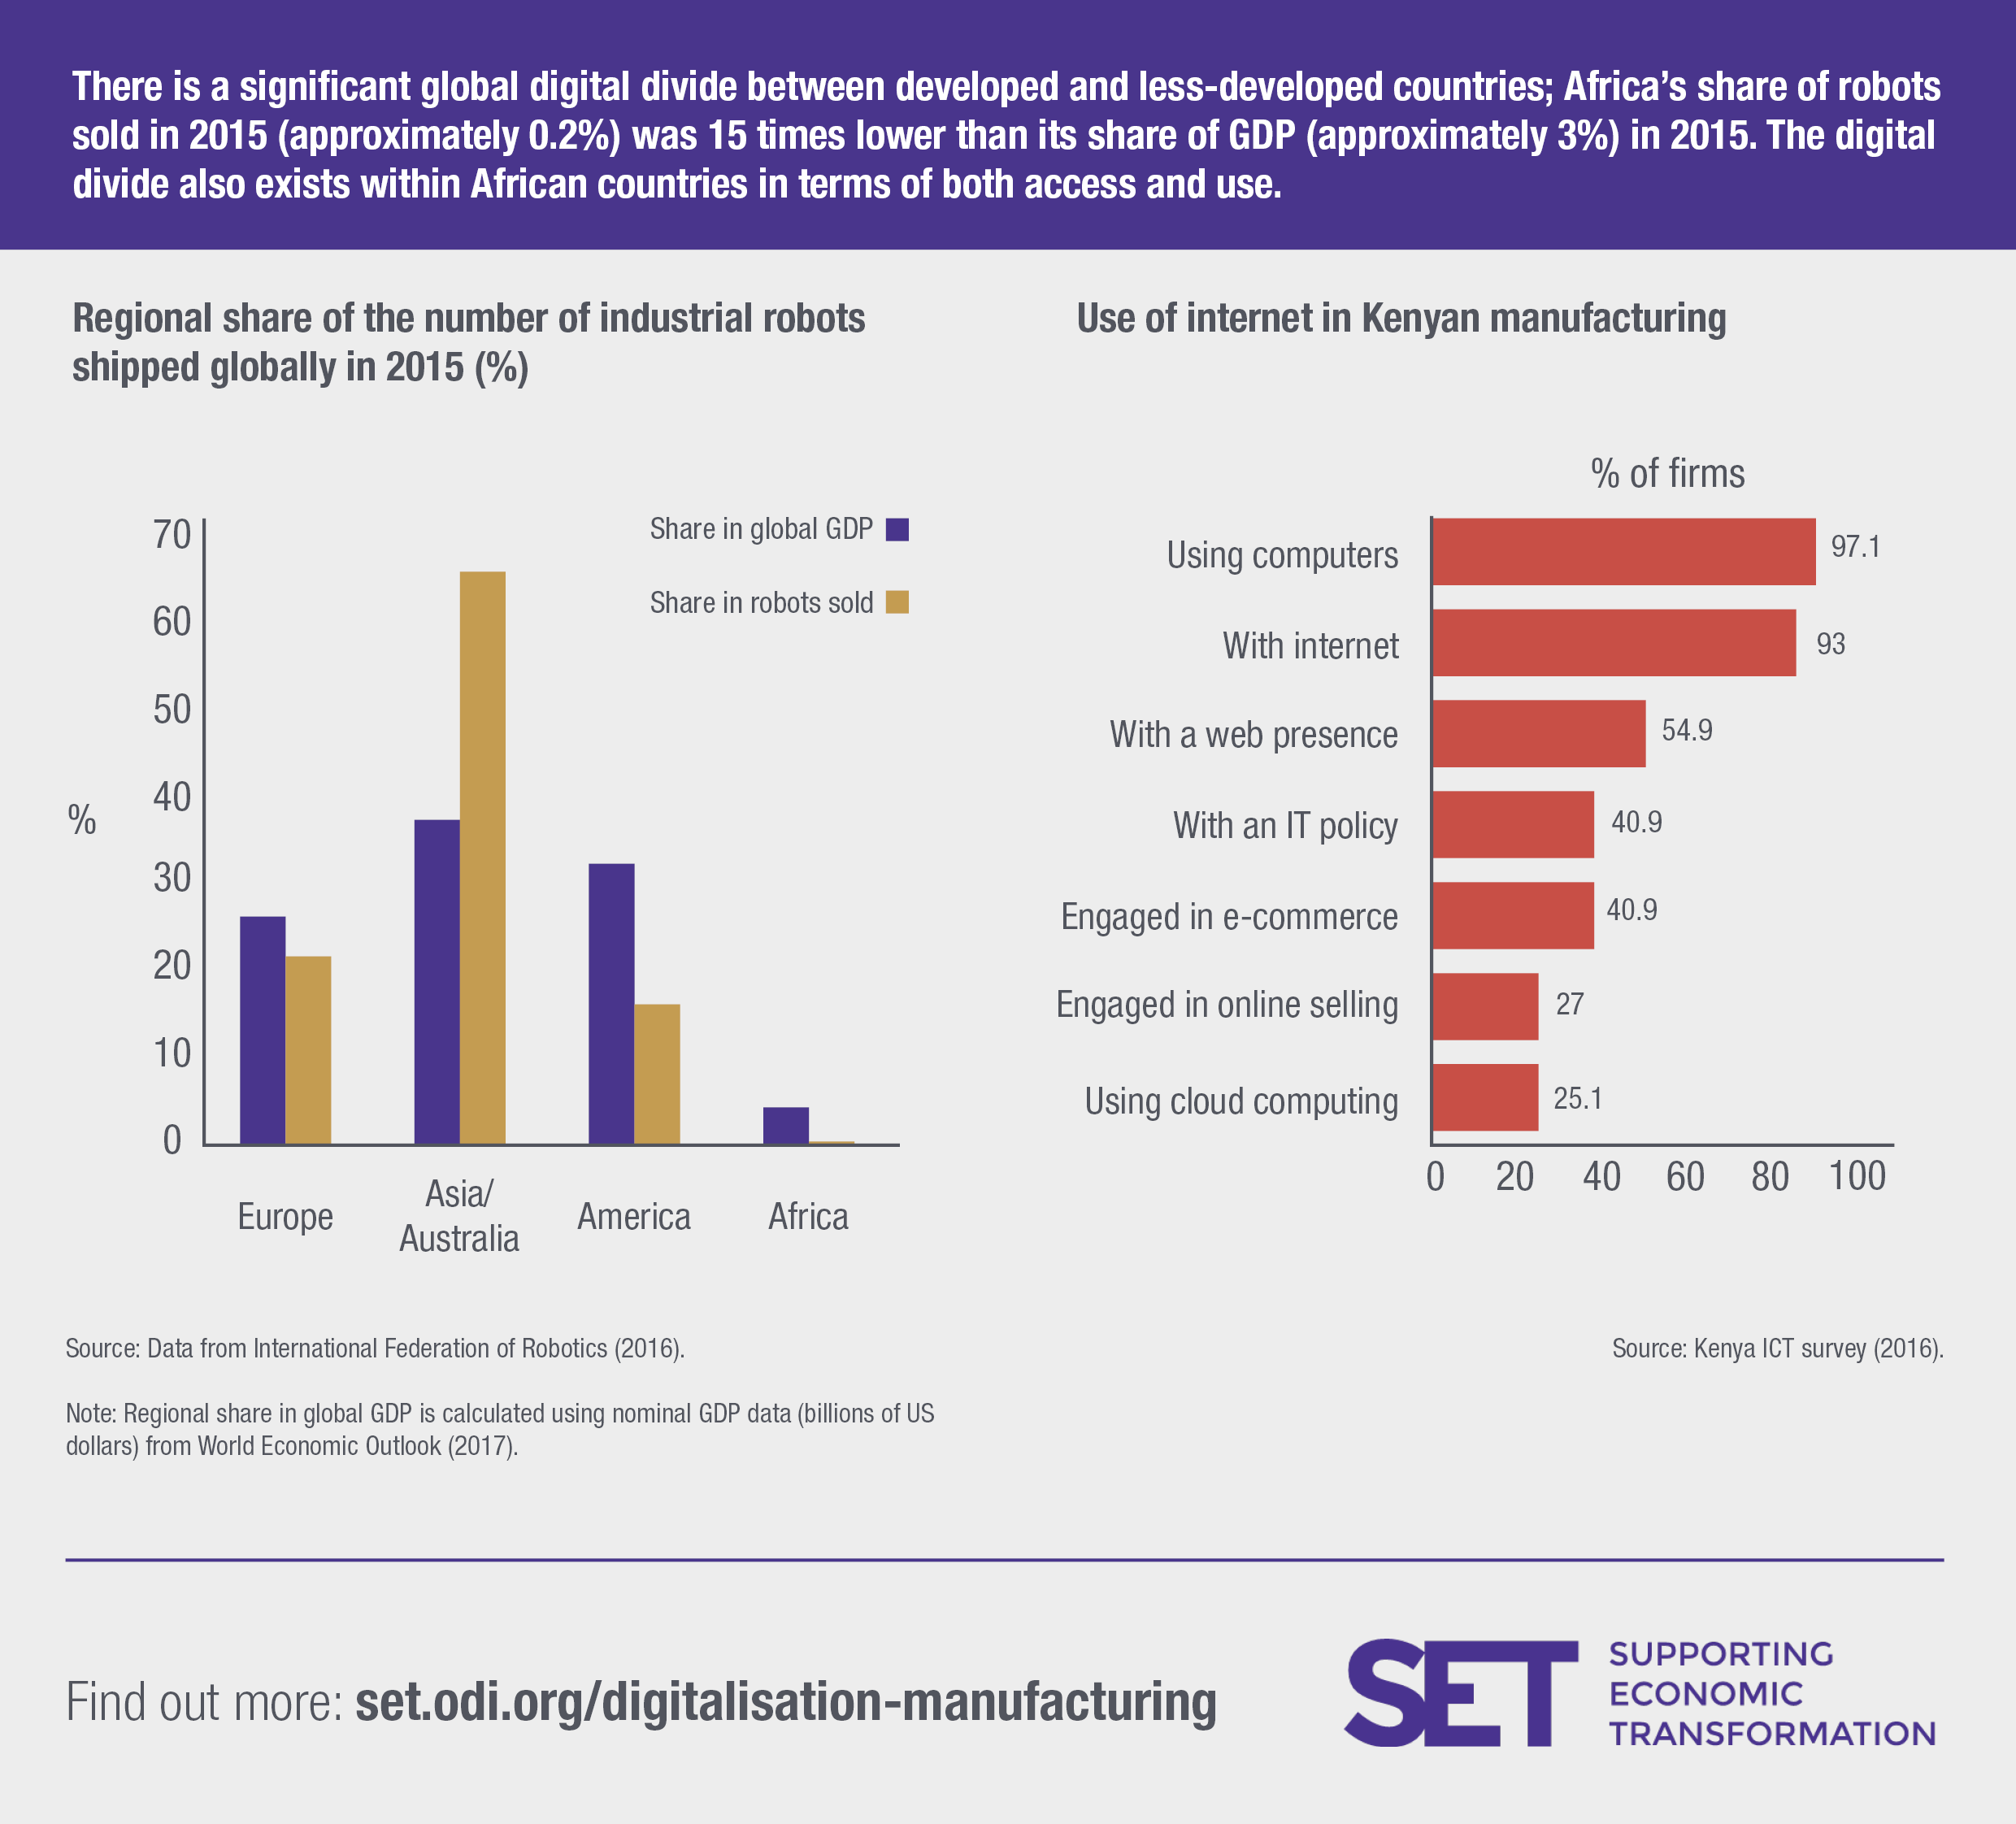 There is a significant digital divide between developed and less-developed countries, as well as within developing countries. Image: SET programme.